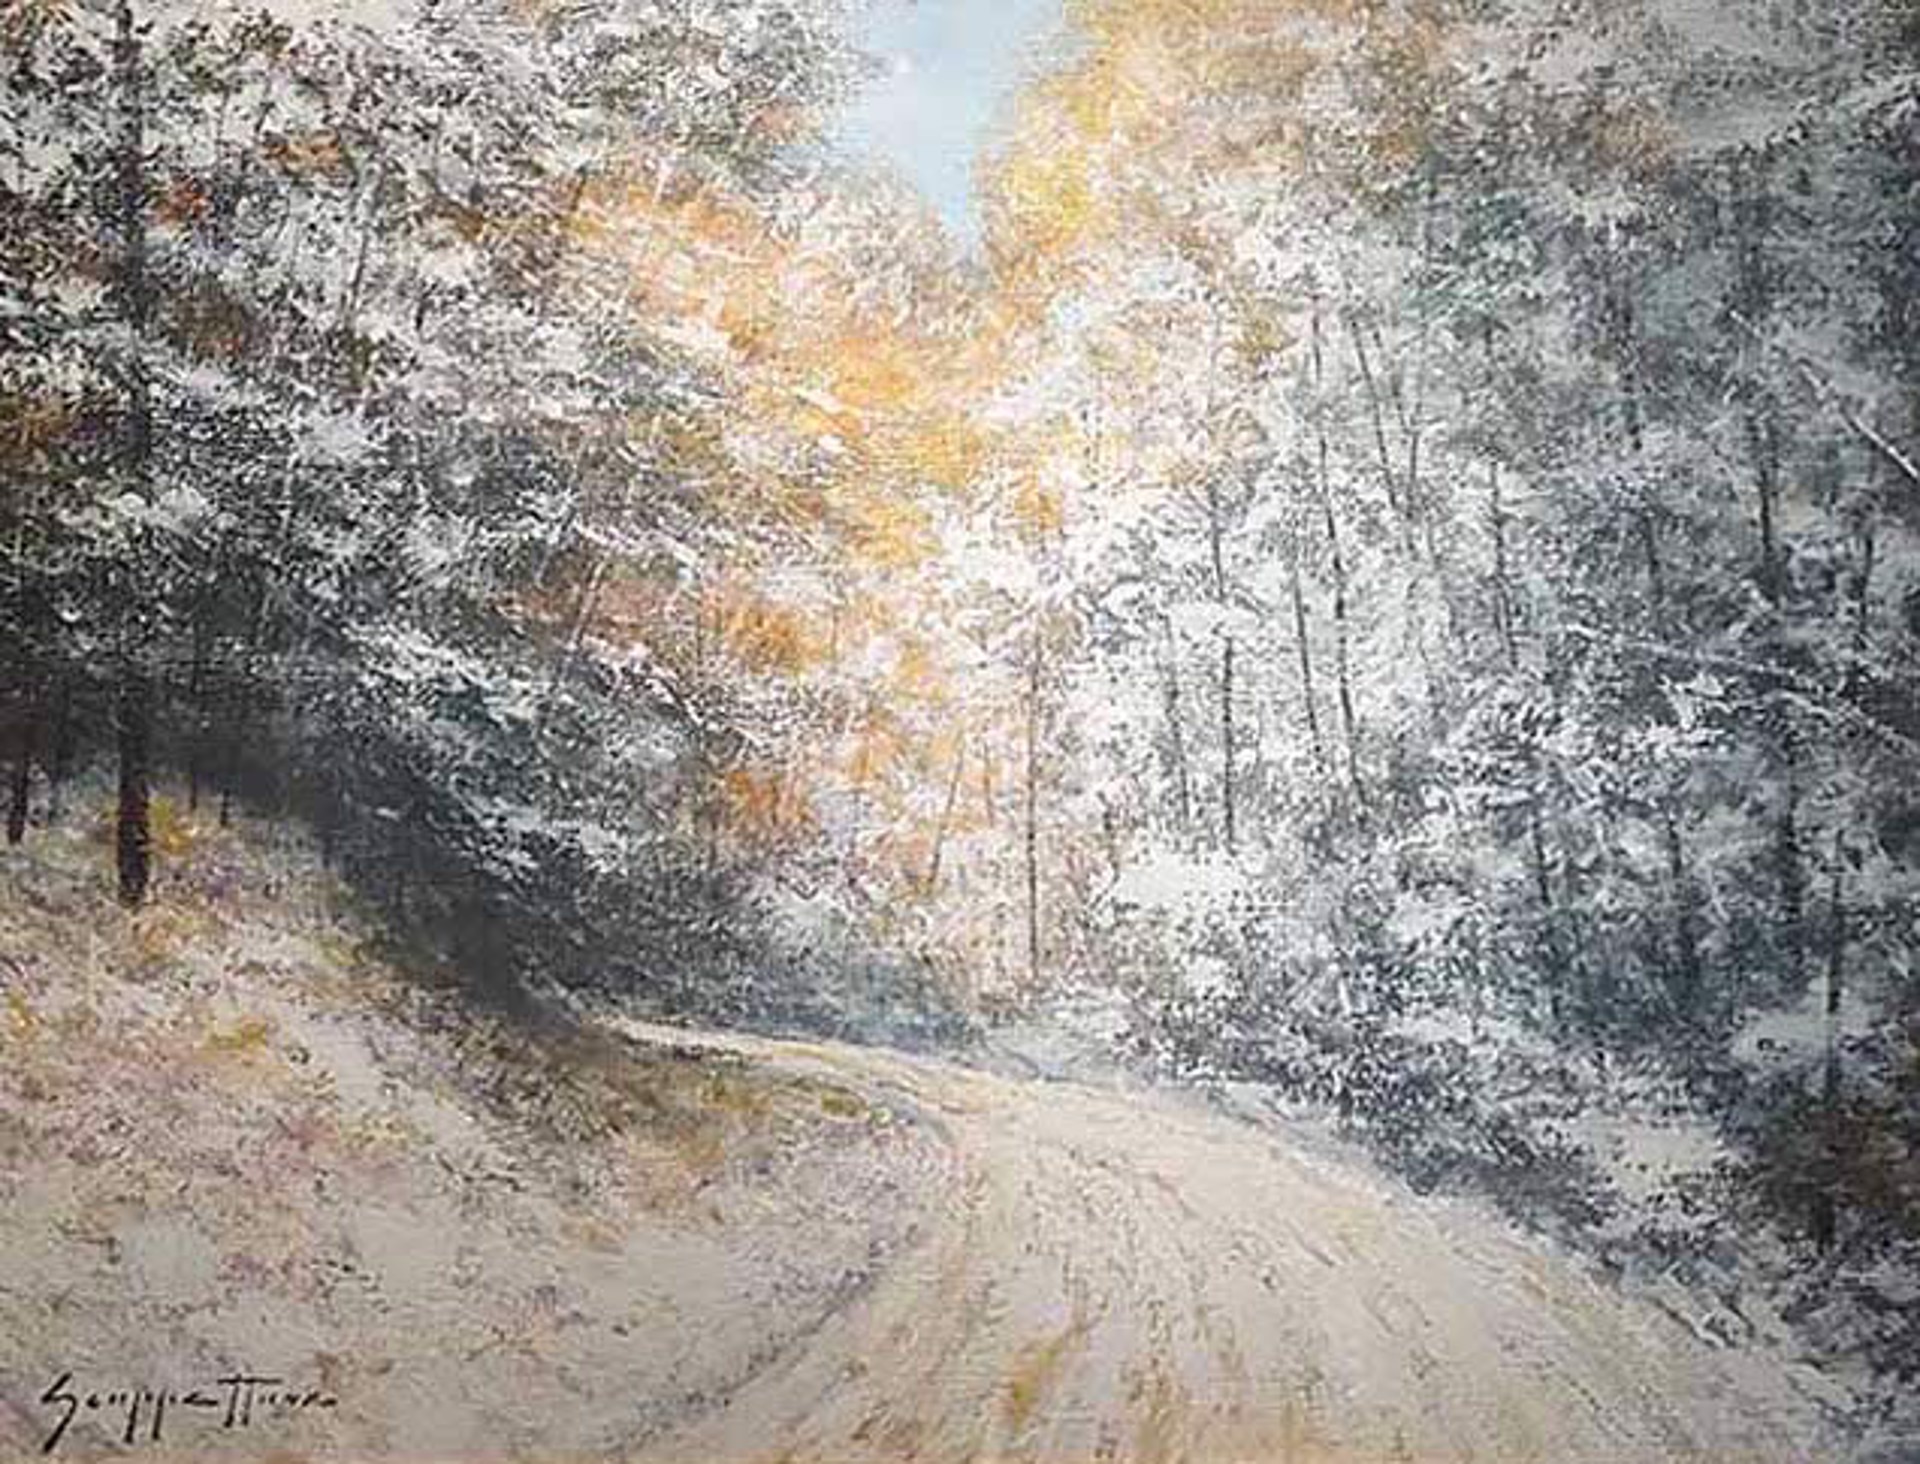 Late Autumn, Early Snow by James Scoppettone